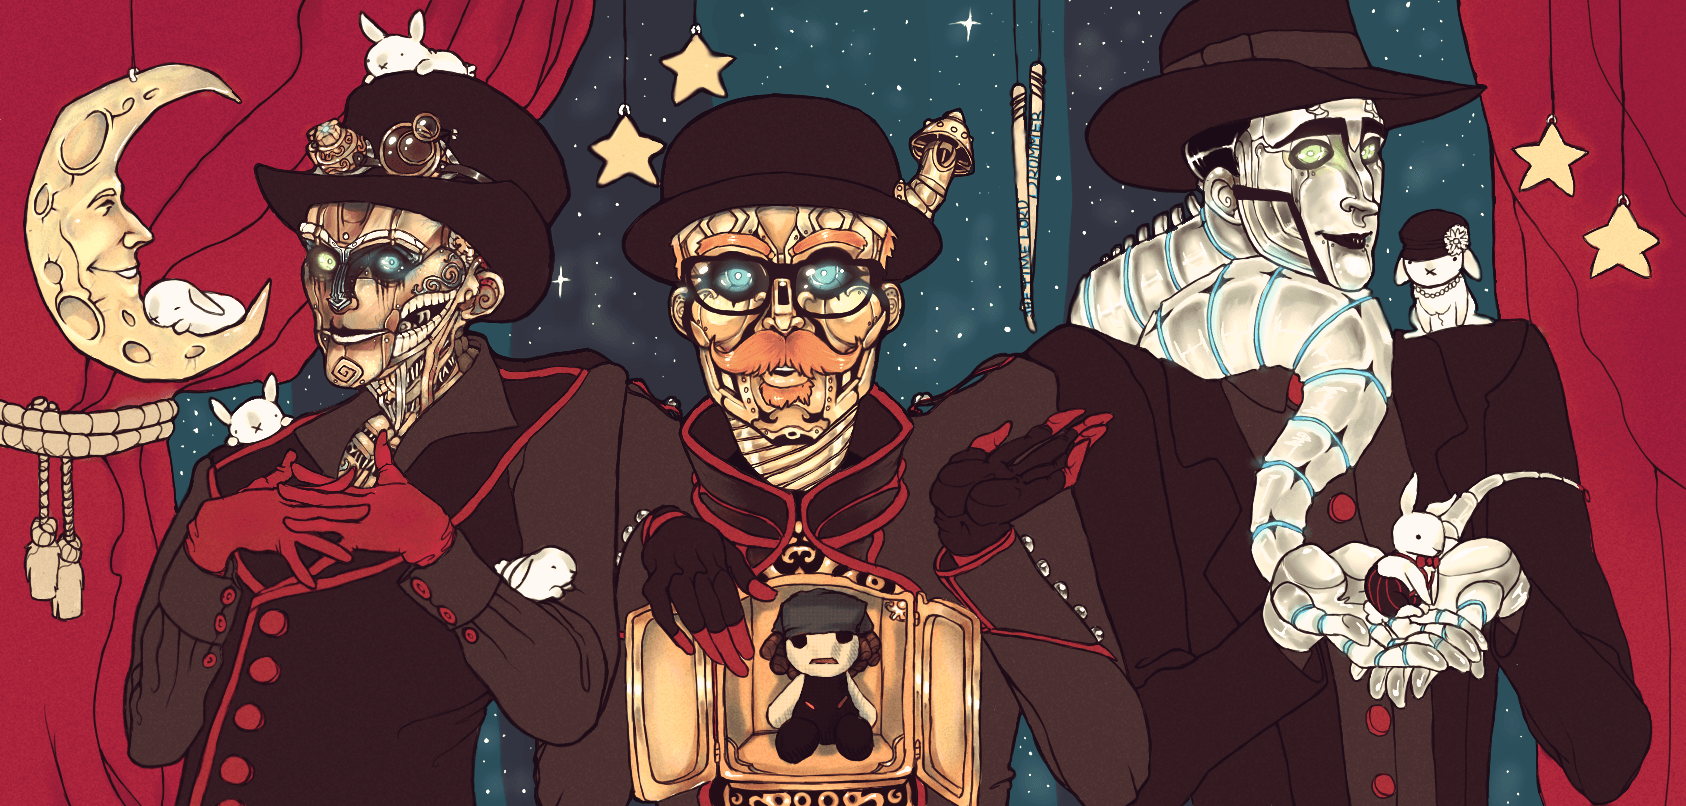 Steam Powered Giraffe. The Something New Project